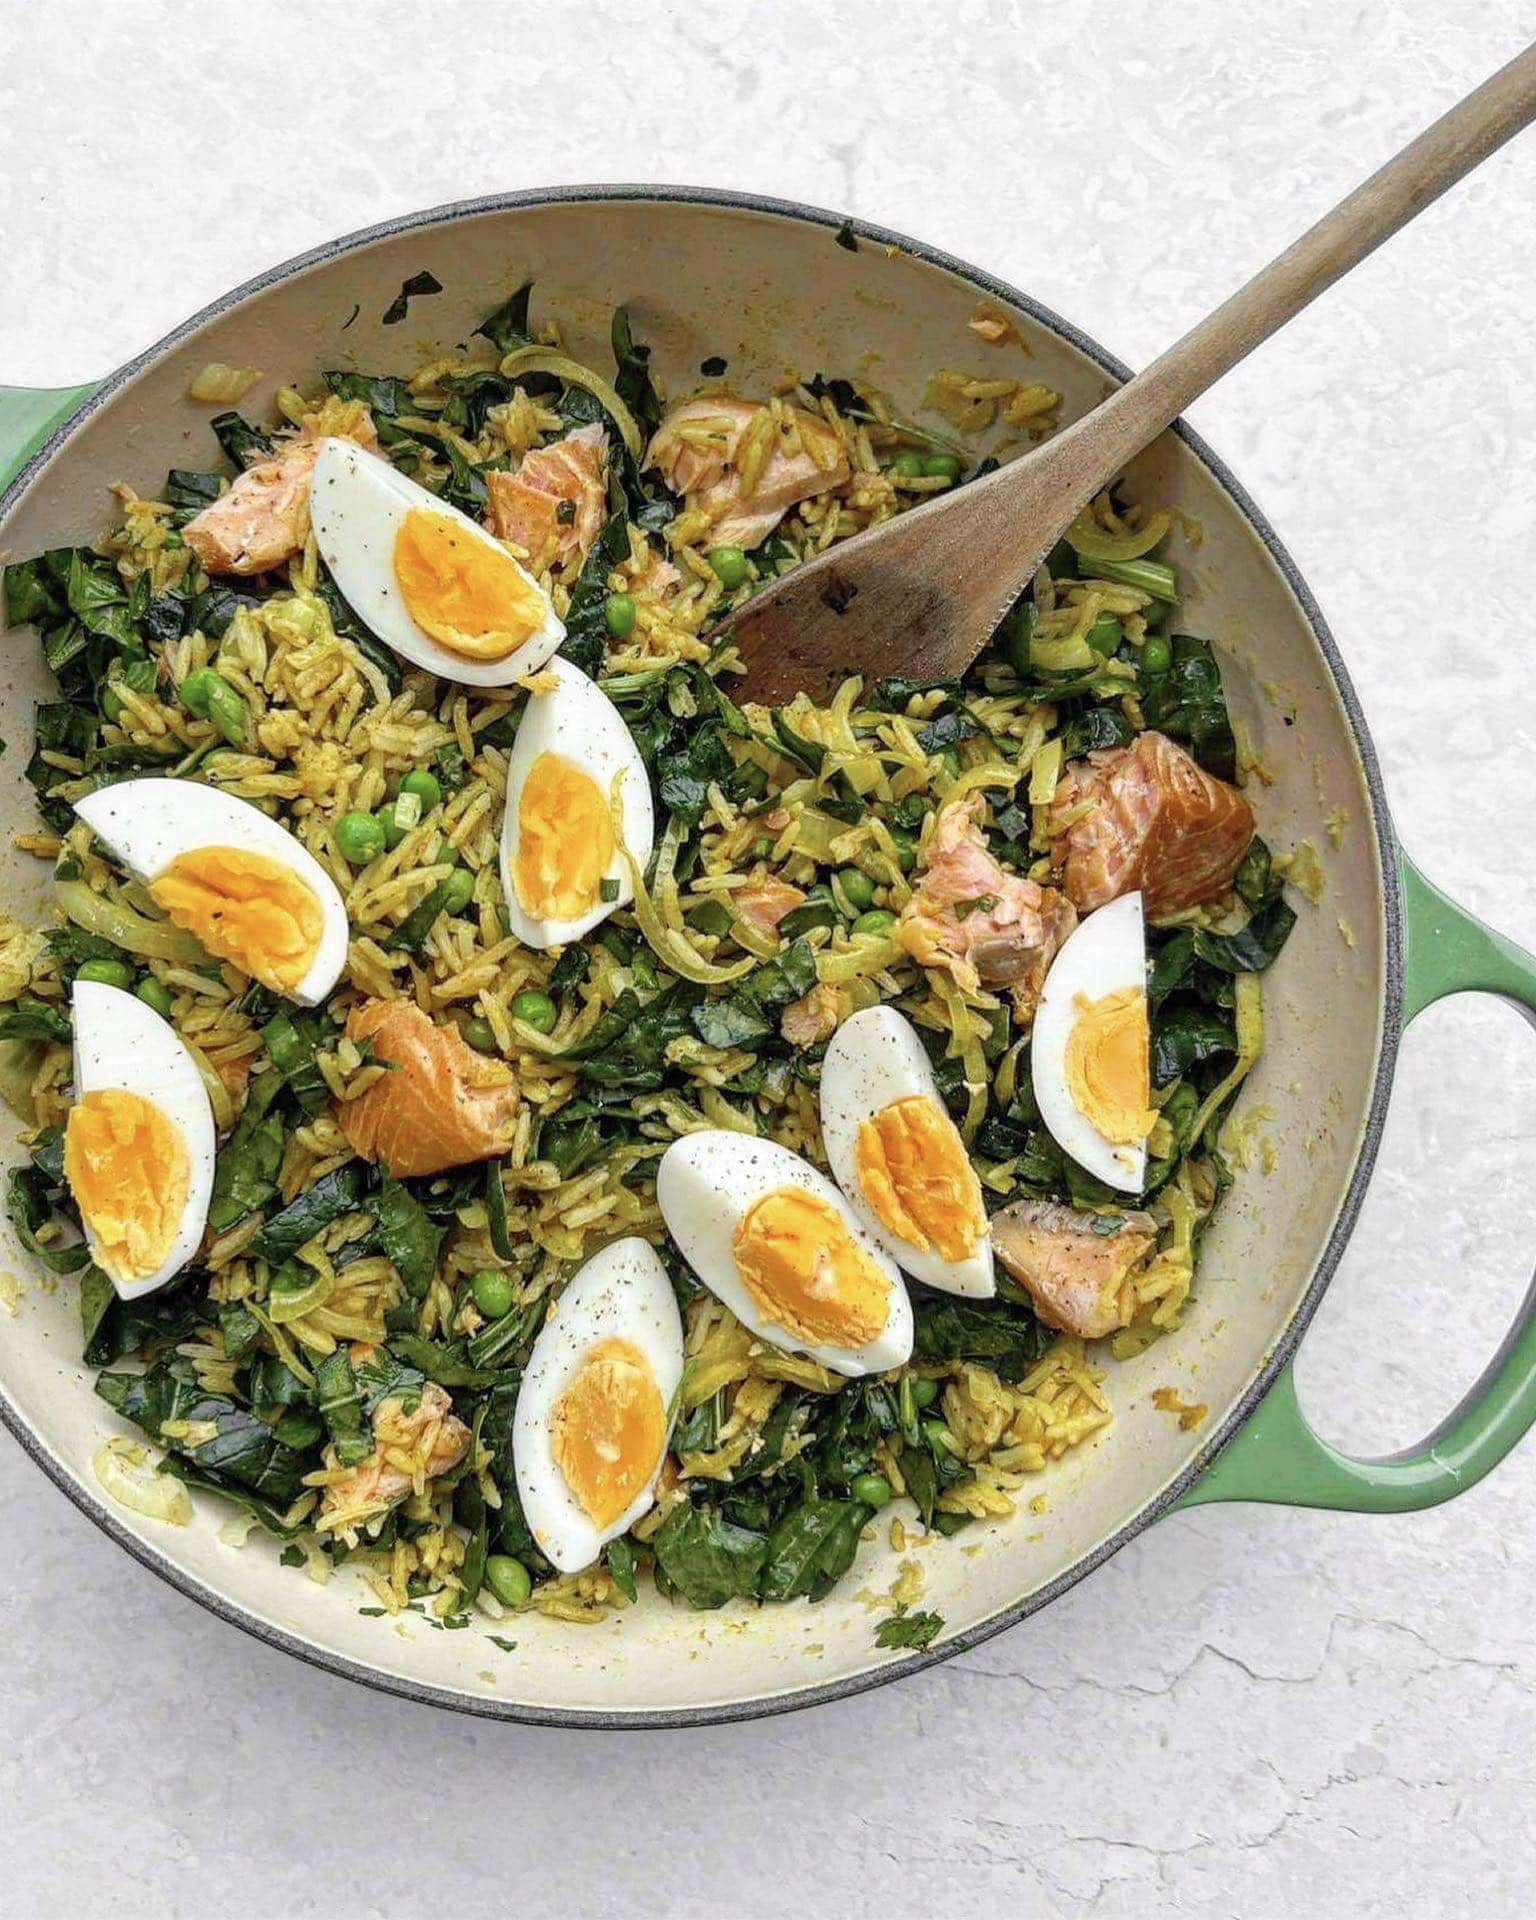 Kedgeree with spinach and herbs